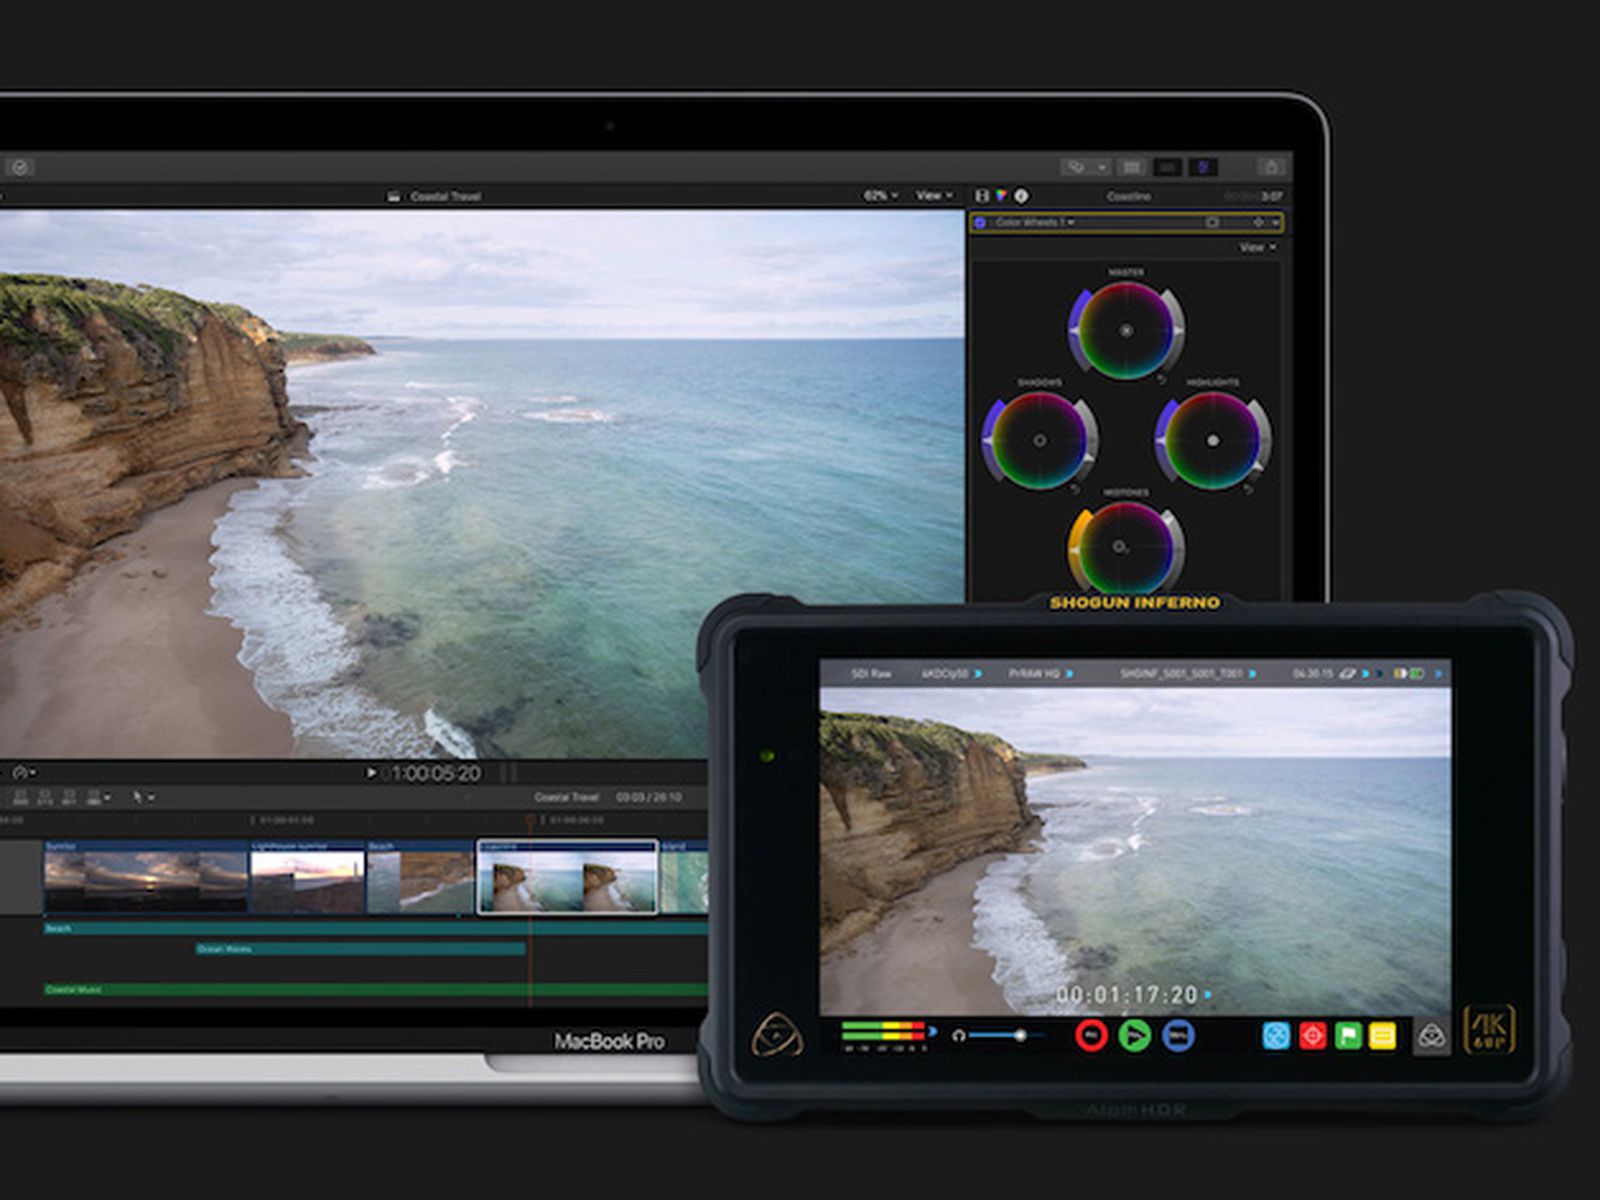 how much does final cut pro cost for mac